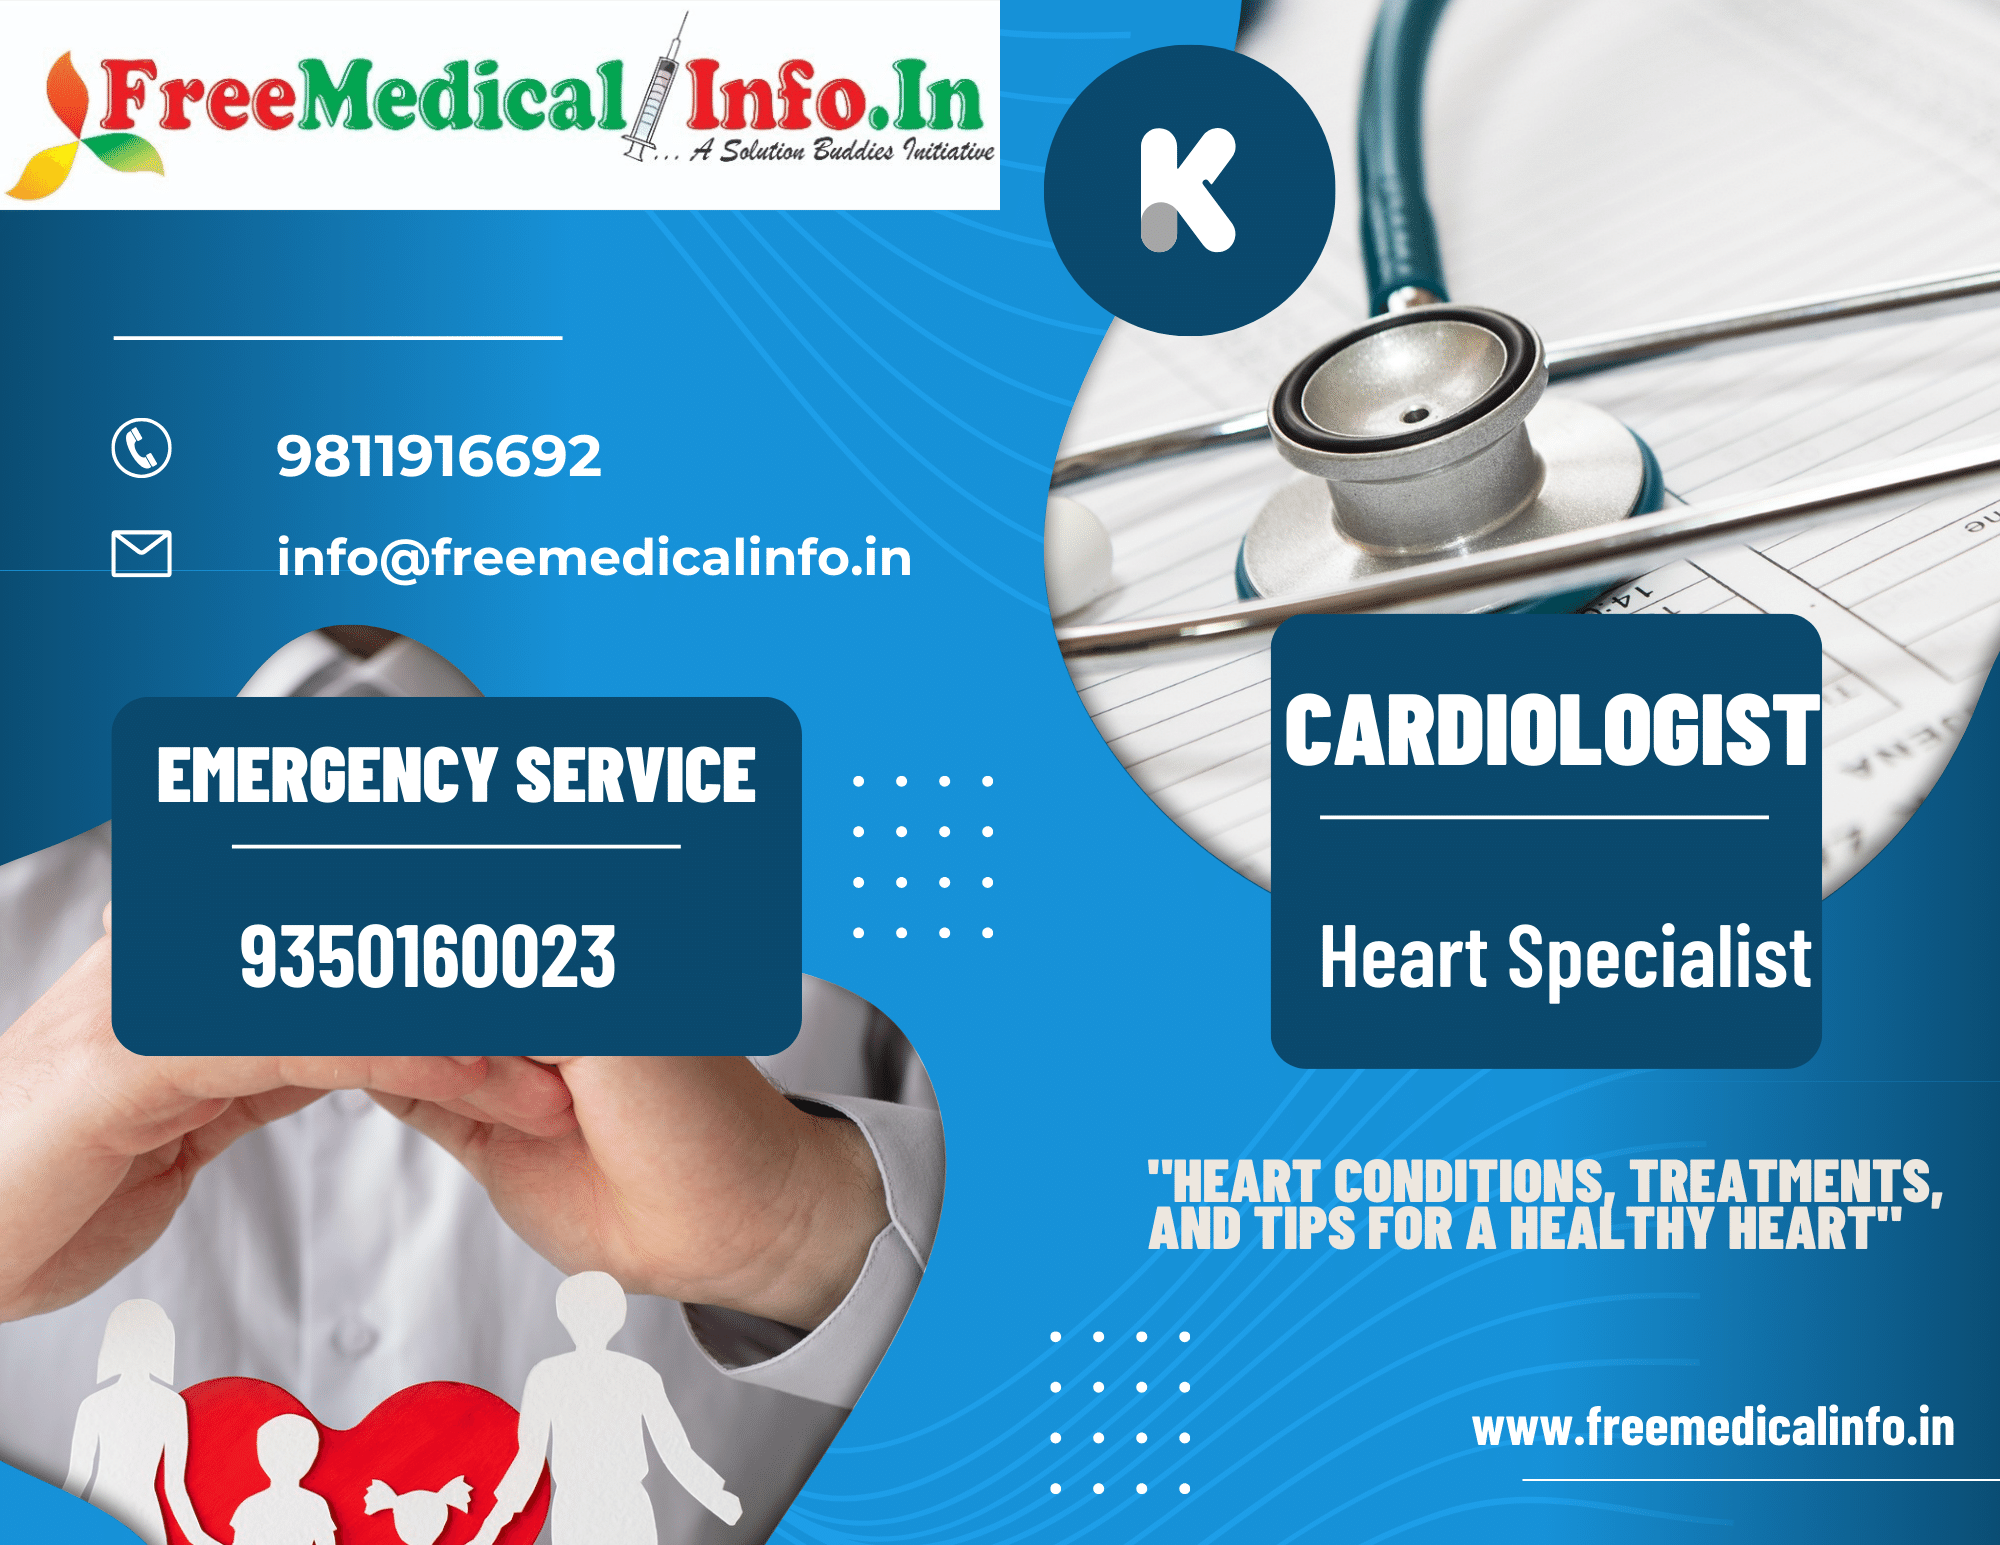 Information about common heart problems and treatments, as well as heart-healthy lifestyle suggestions